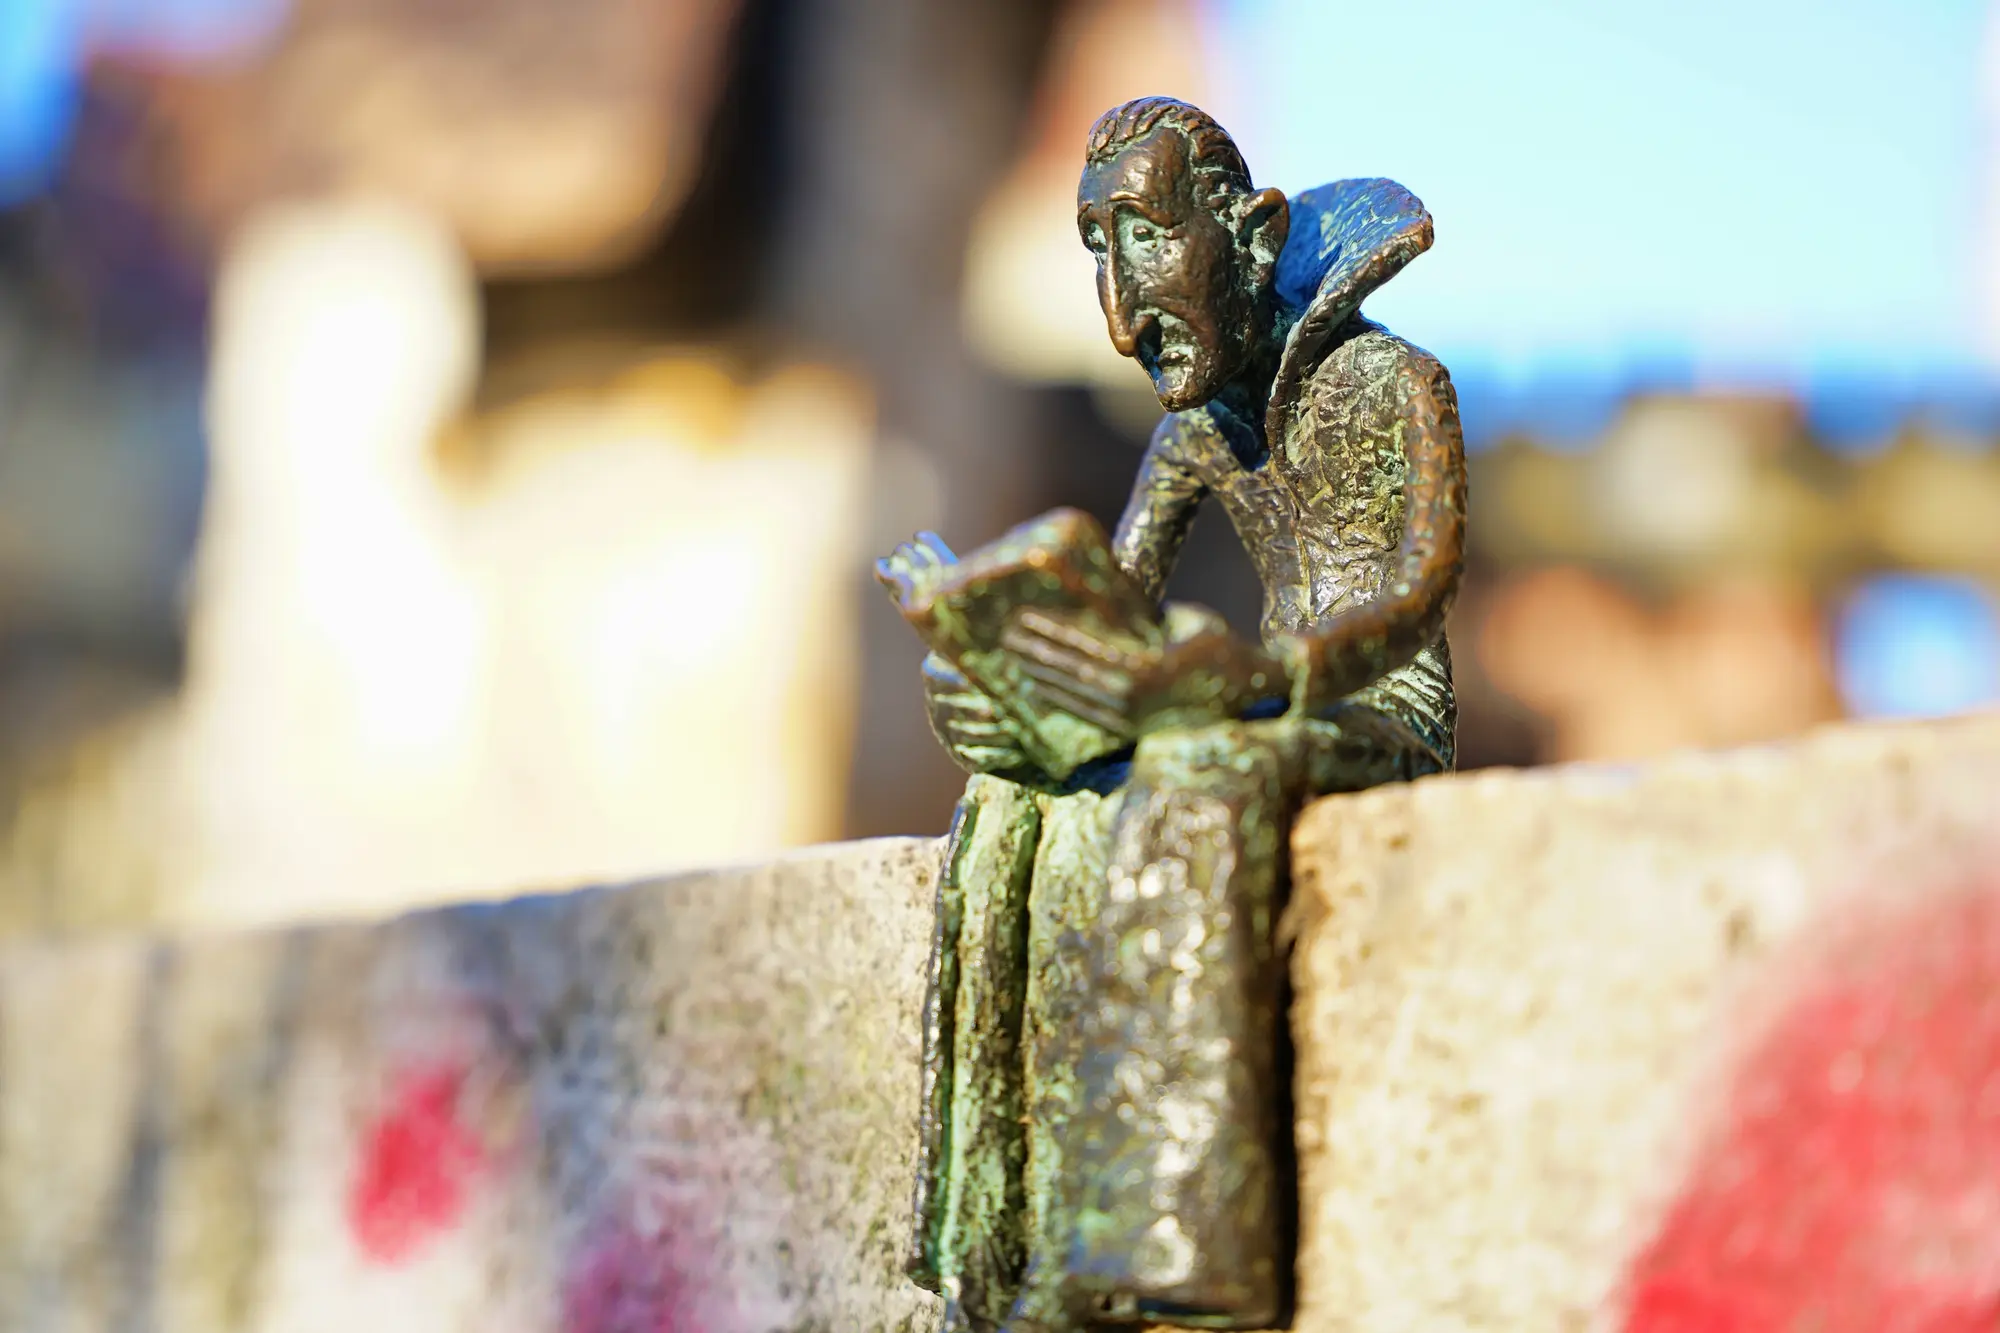 Mini statue of Dracula sitting on the book while reading a book made by artist Kolodko, a hidden gems in Budapest.